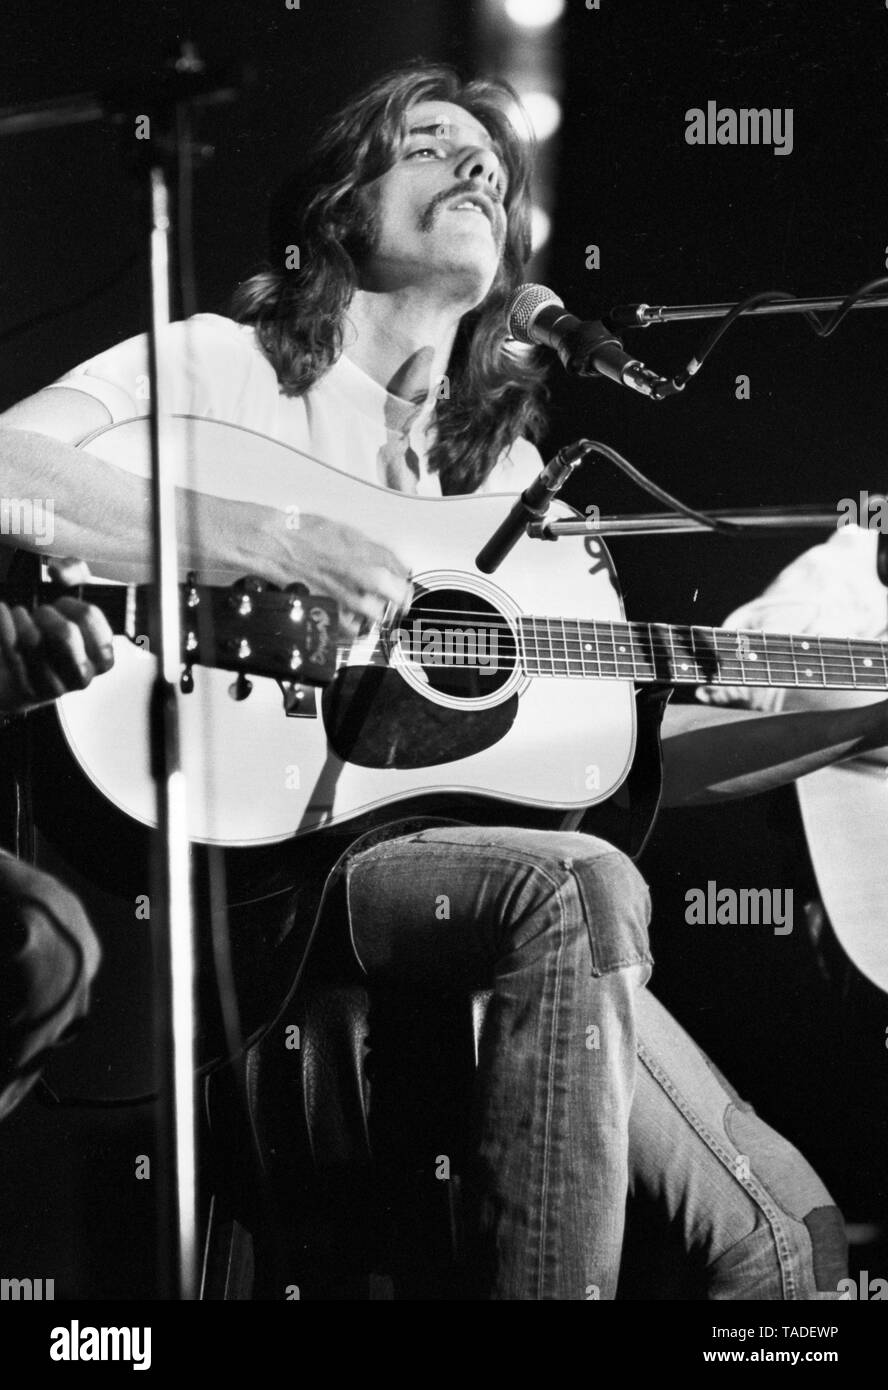 Amsterdam, Netherlands - March 10, 1973. Glen Fray of American group Eagles perform live on stage at Concertgebouw in Amsterdam, Netherlands in 1972.  (Photo Gijsbert Hanekroot) Stock Photo